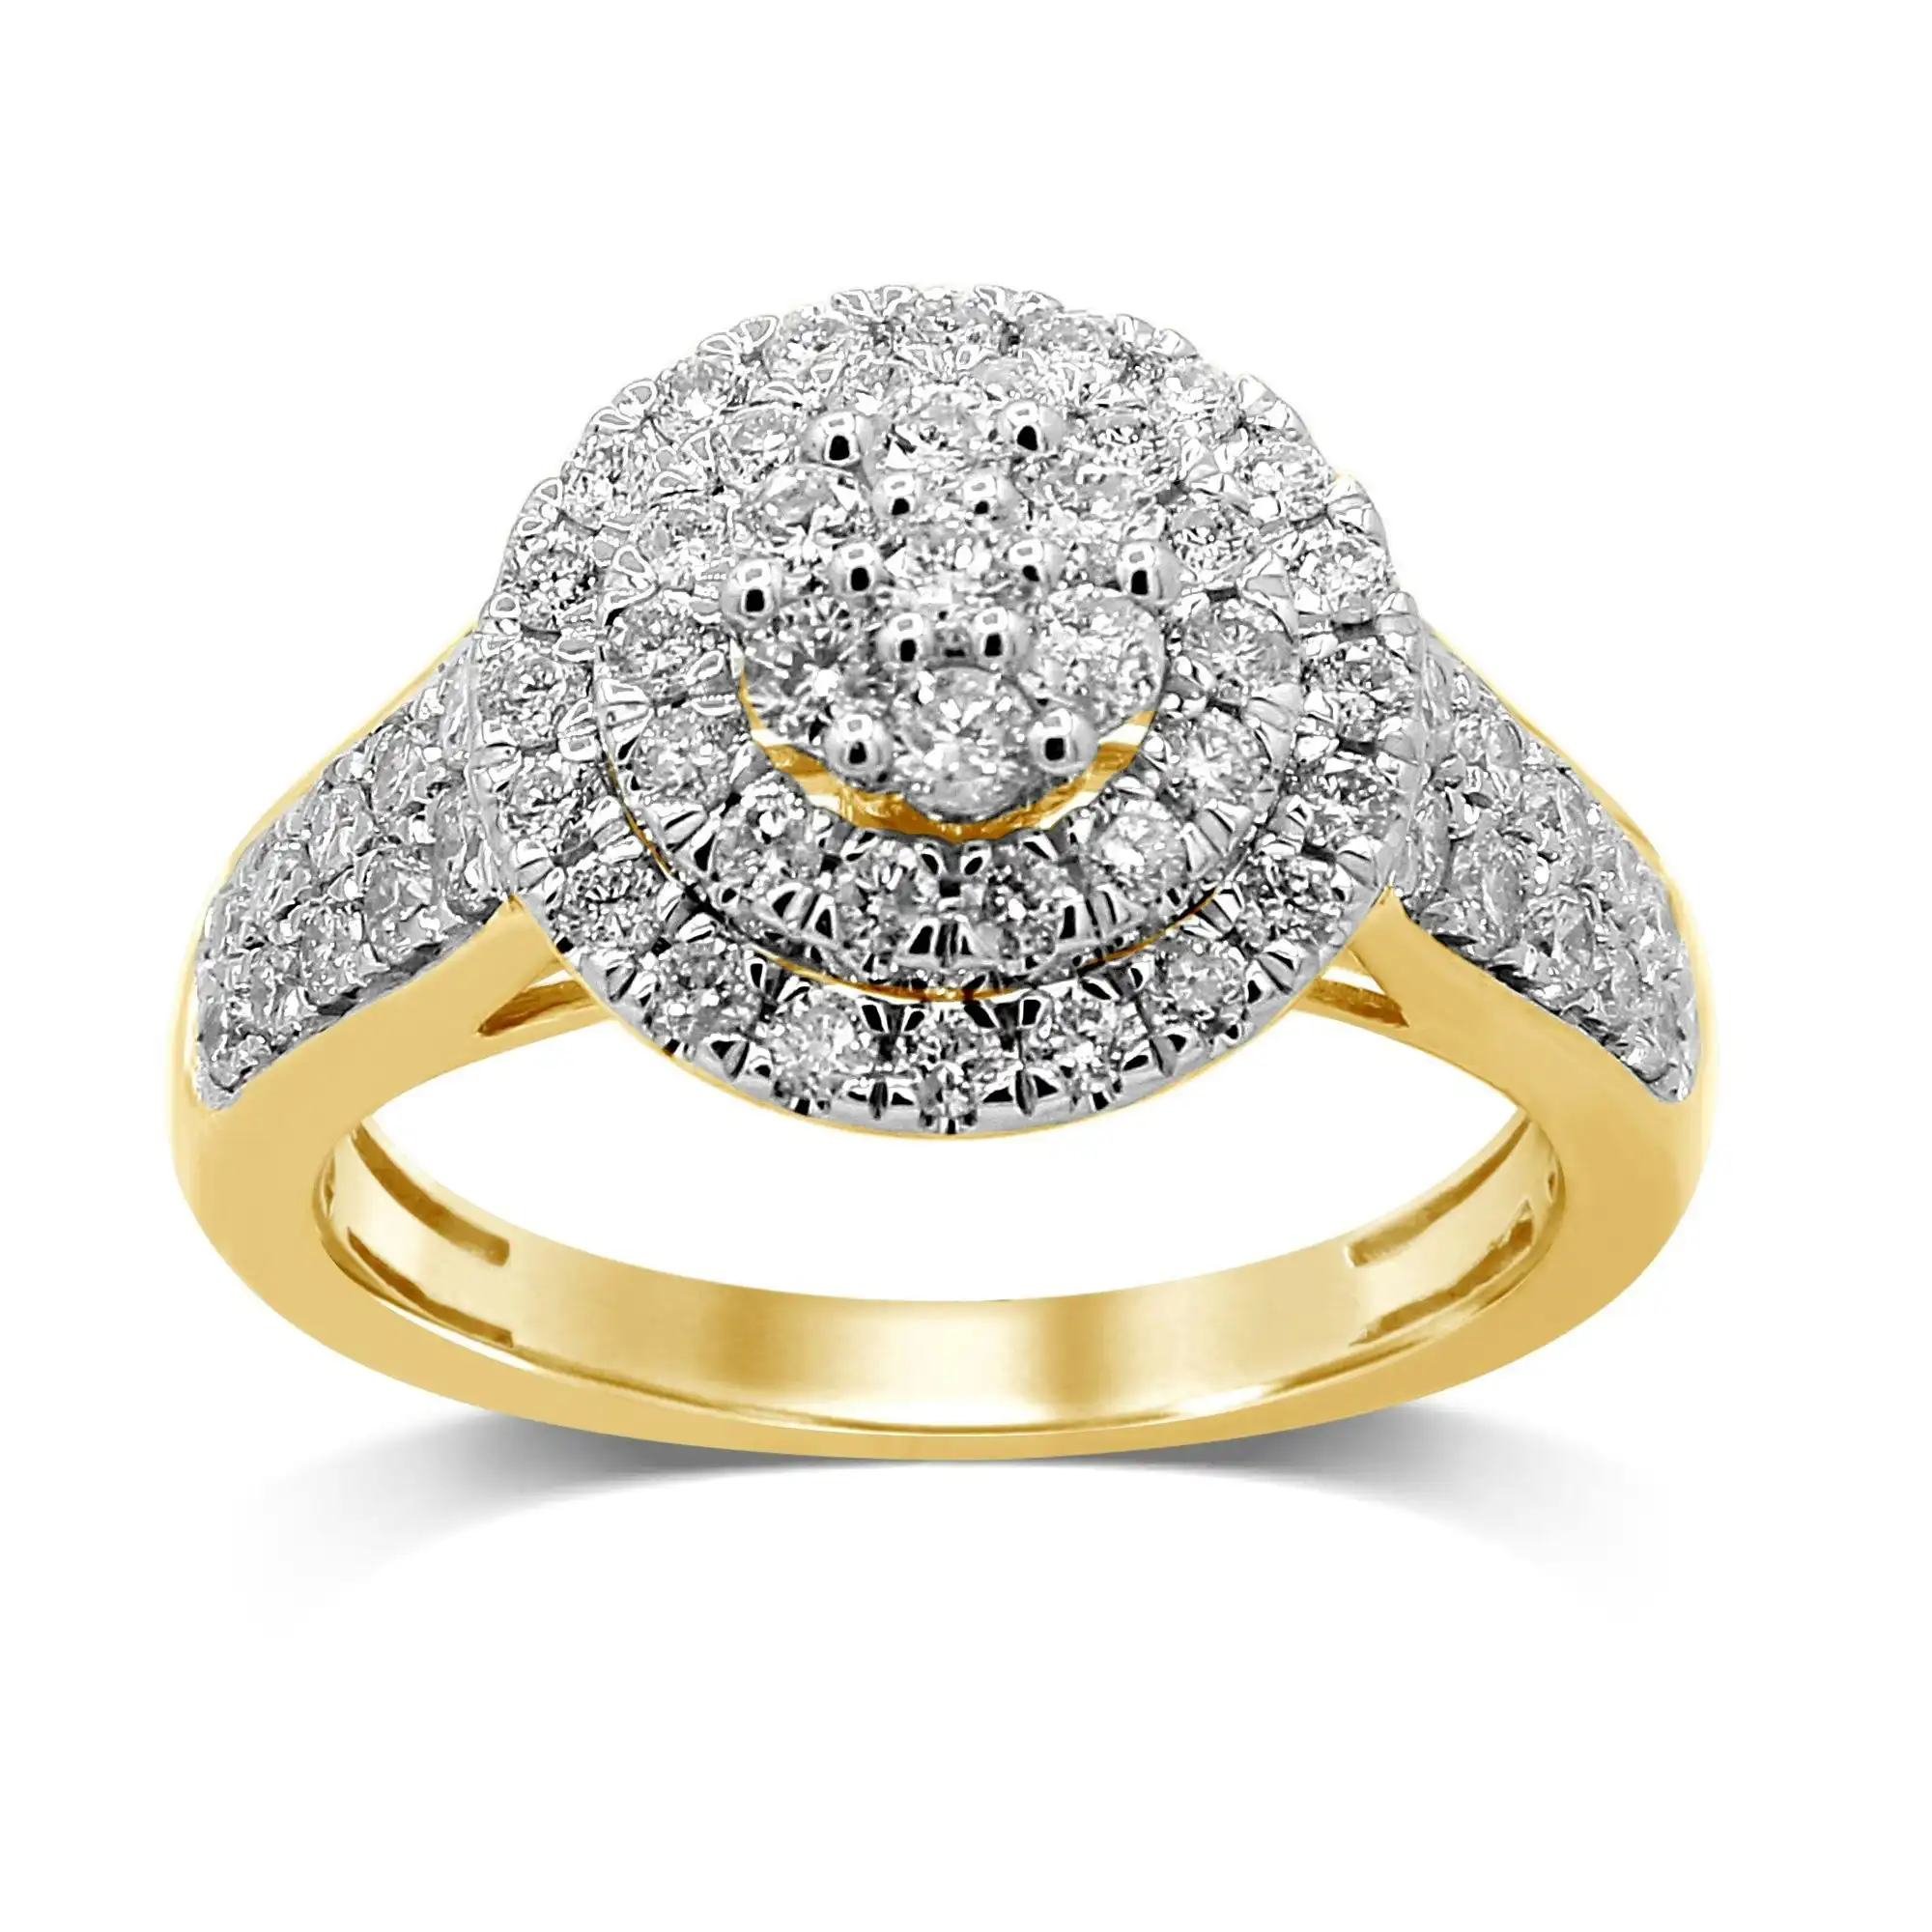 Brilliant Set Double Halo Ring with 1.00ct of Diamonds in 9ct Yellow Gold